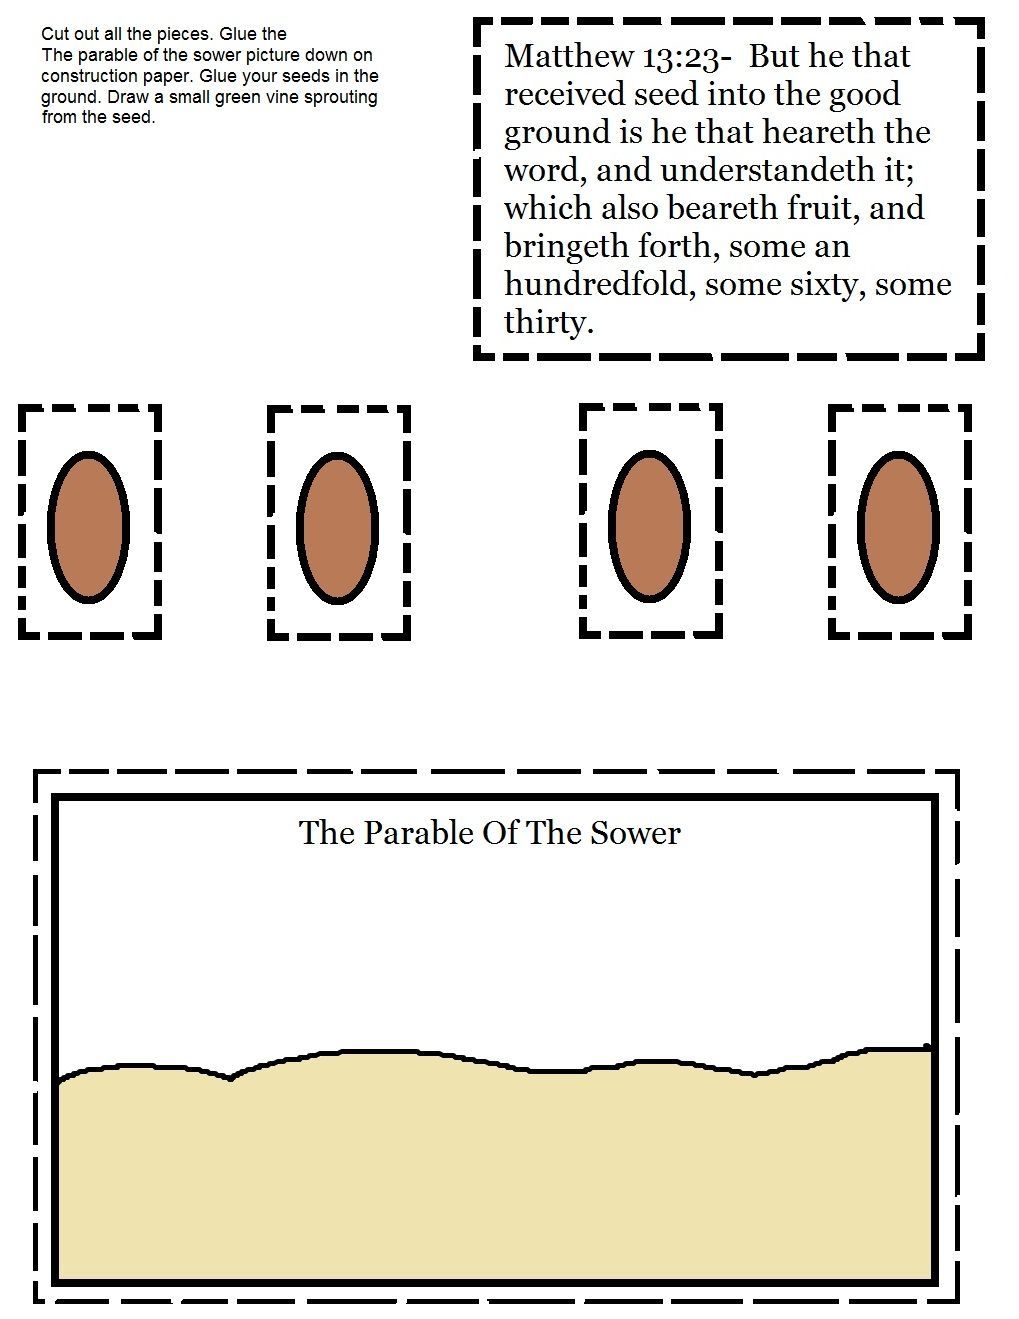 Parable Of The Sower Worksheets Sunday School Lessons Sunday School Preschool Sunday School Kids